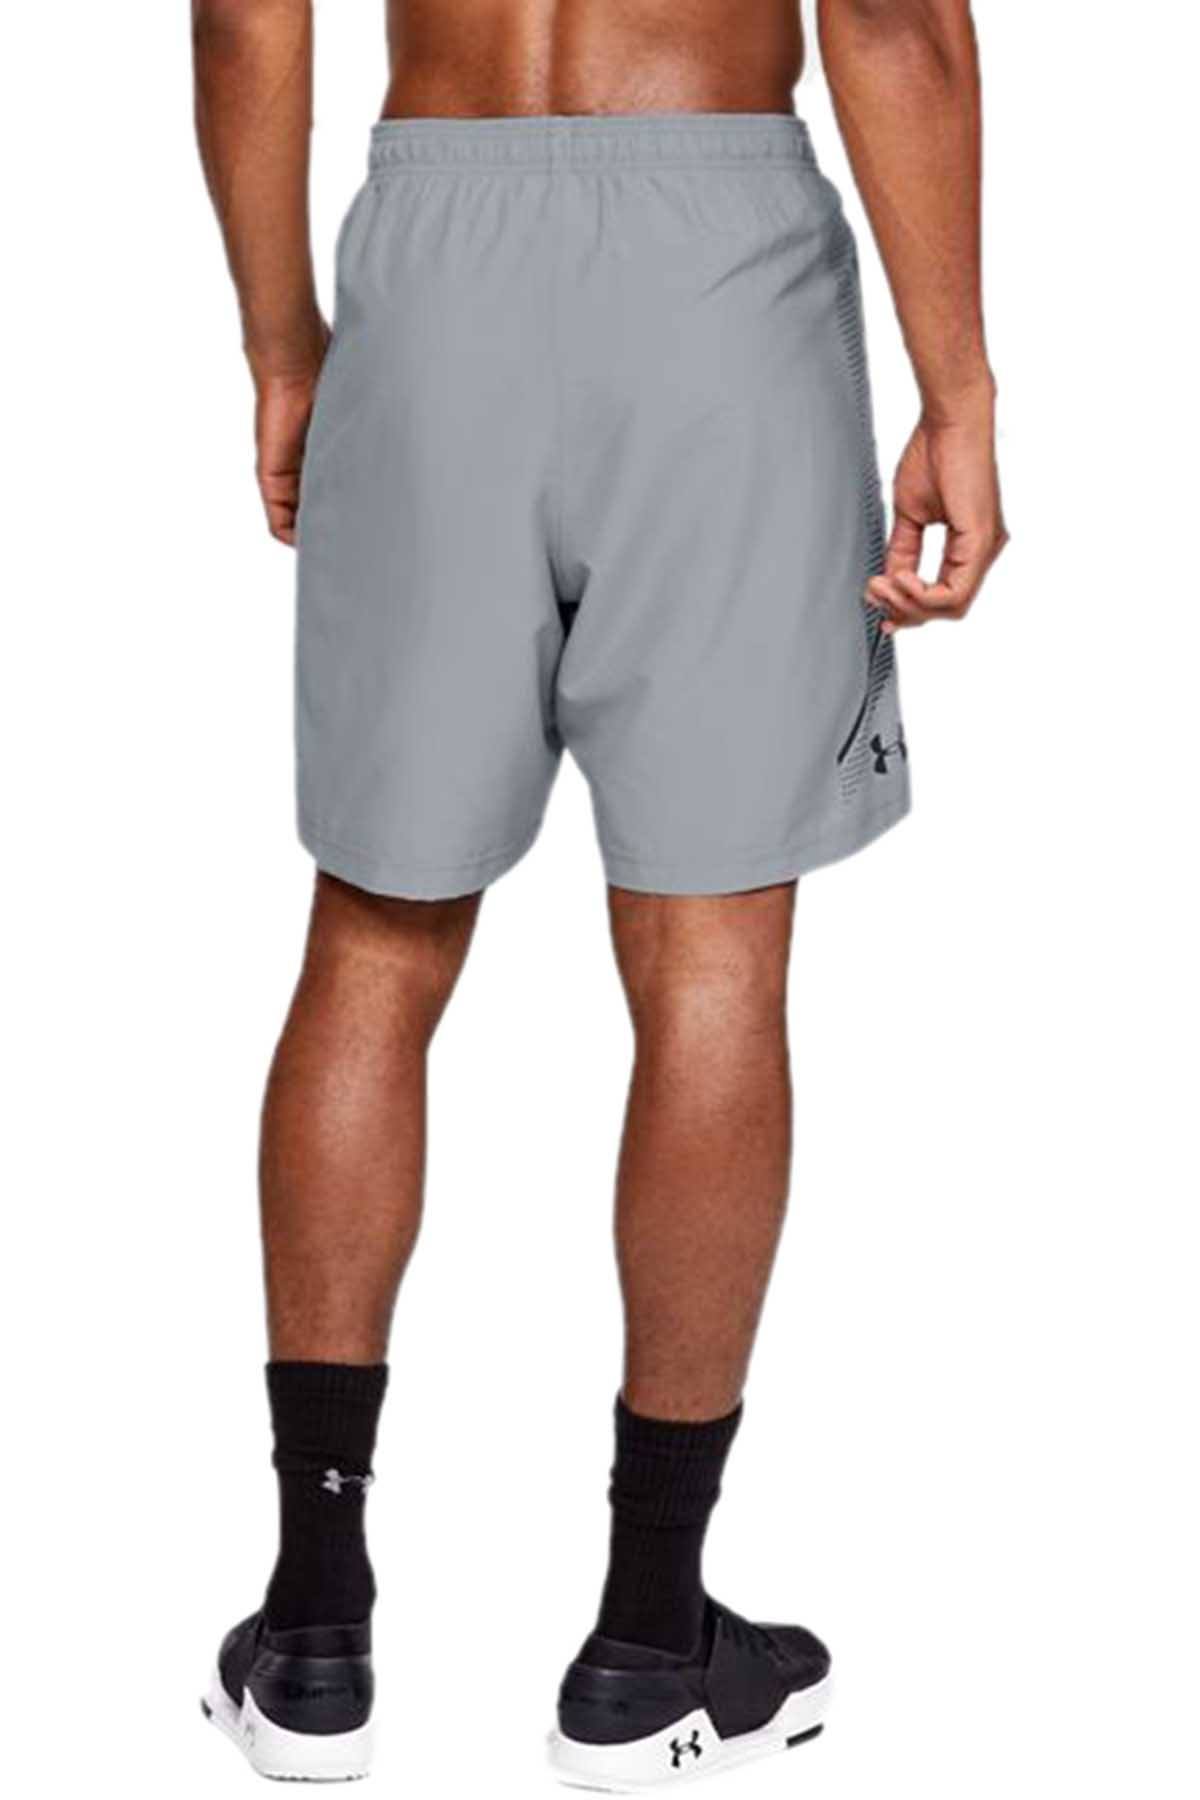 Under Armour Steel Woven Graphic Short